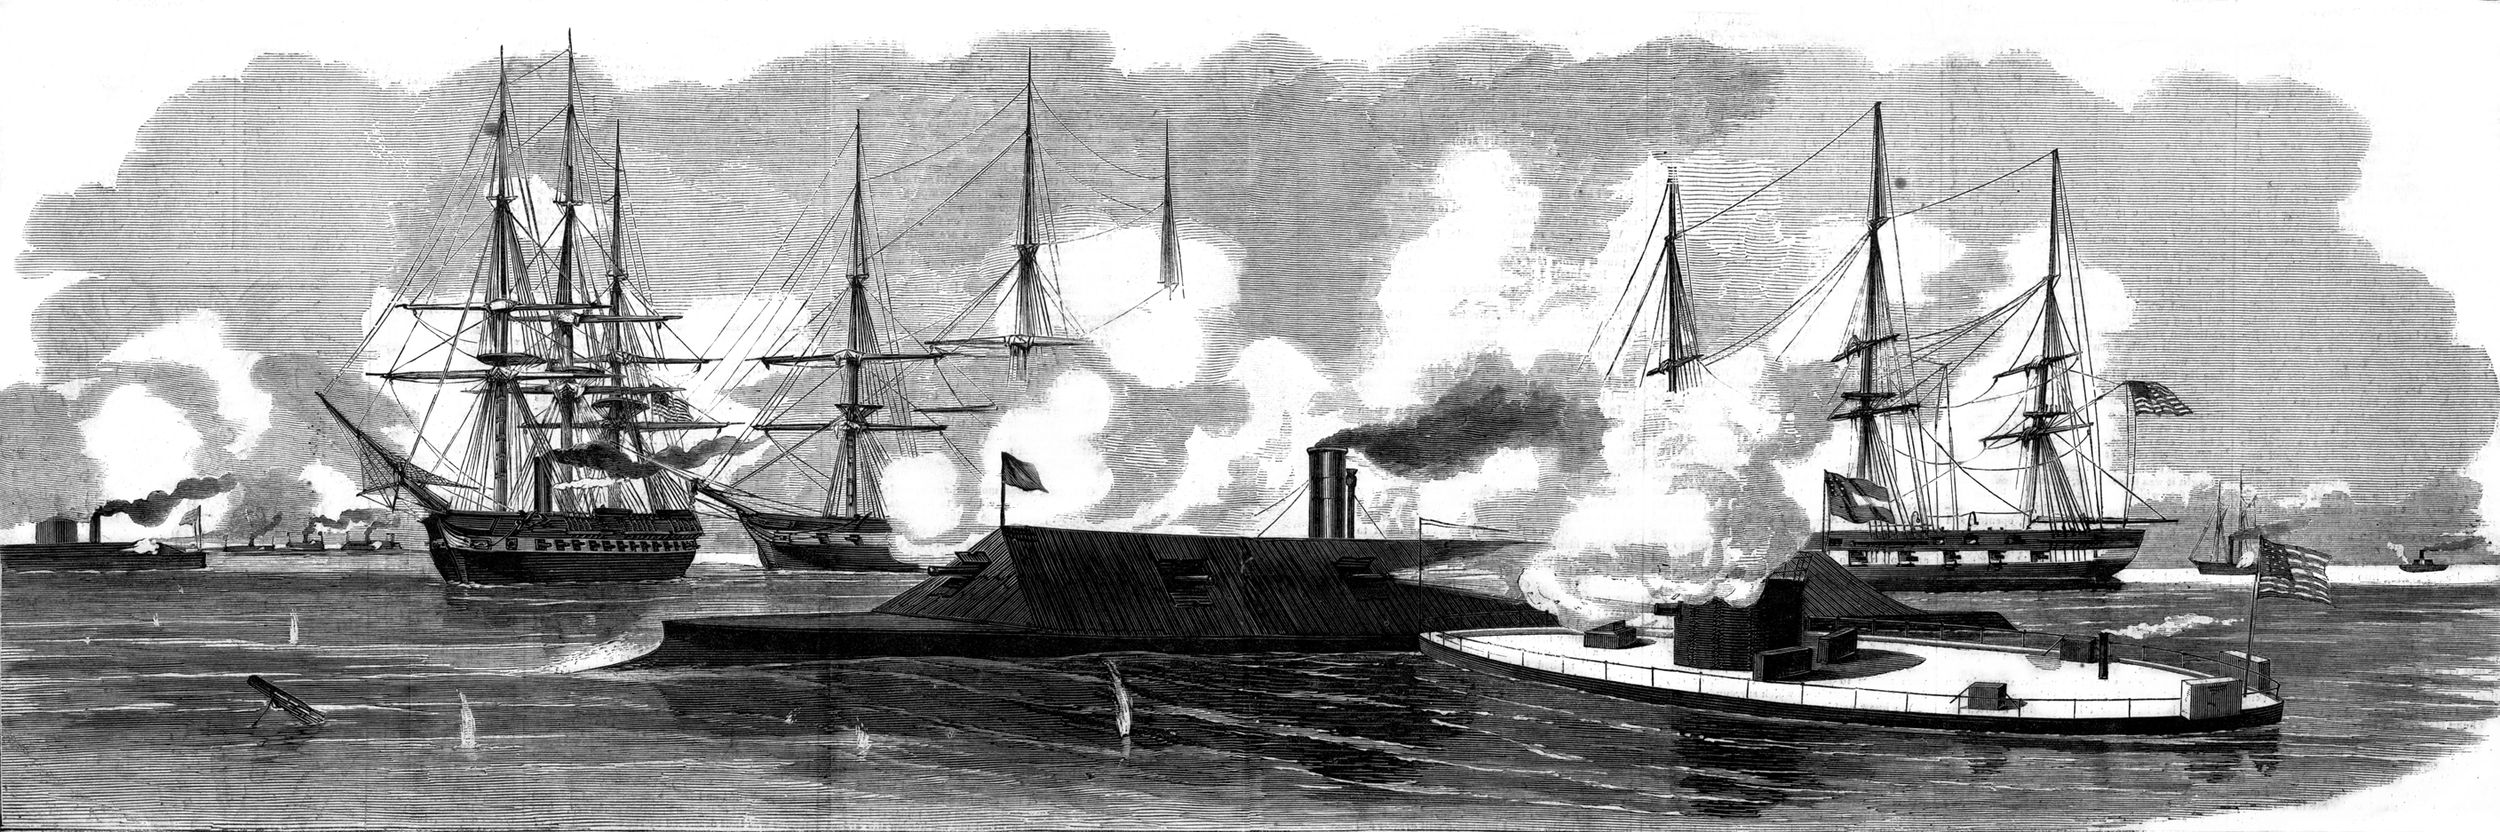 Following the inconclusive battle at Hampton Roads shown in this Harper’s Weekly illustration, the USS Virginia returned to port. The Confederates scuttled the Virginia on May 12, 1862, rather than risk her capture by Union forces.